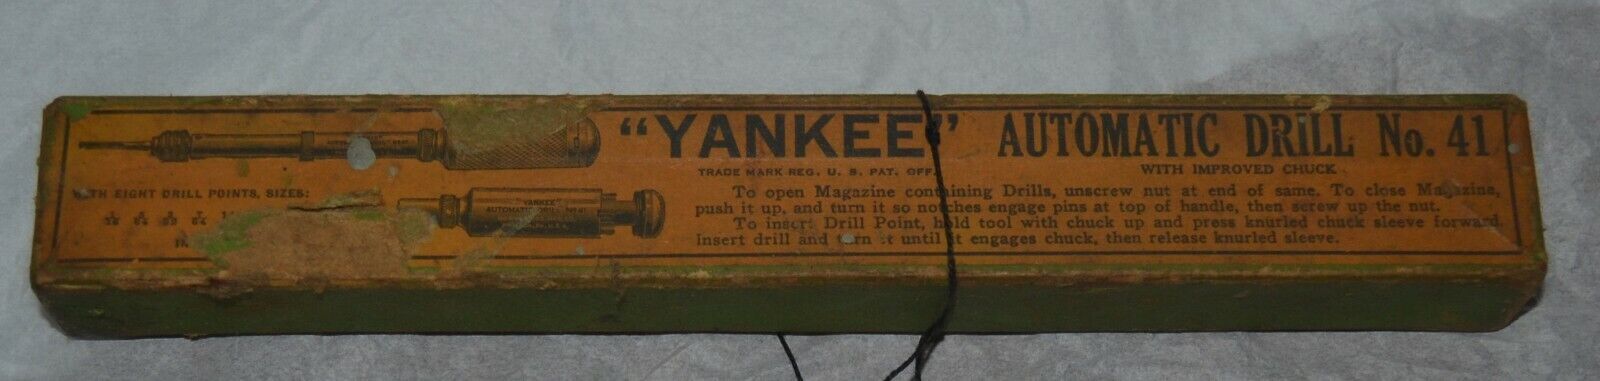 Yankee North Brothers No. 41 Hand Push Automatic Drill Box Only